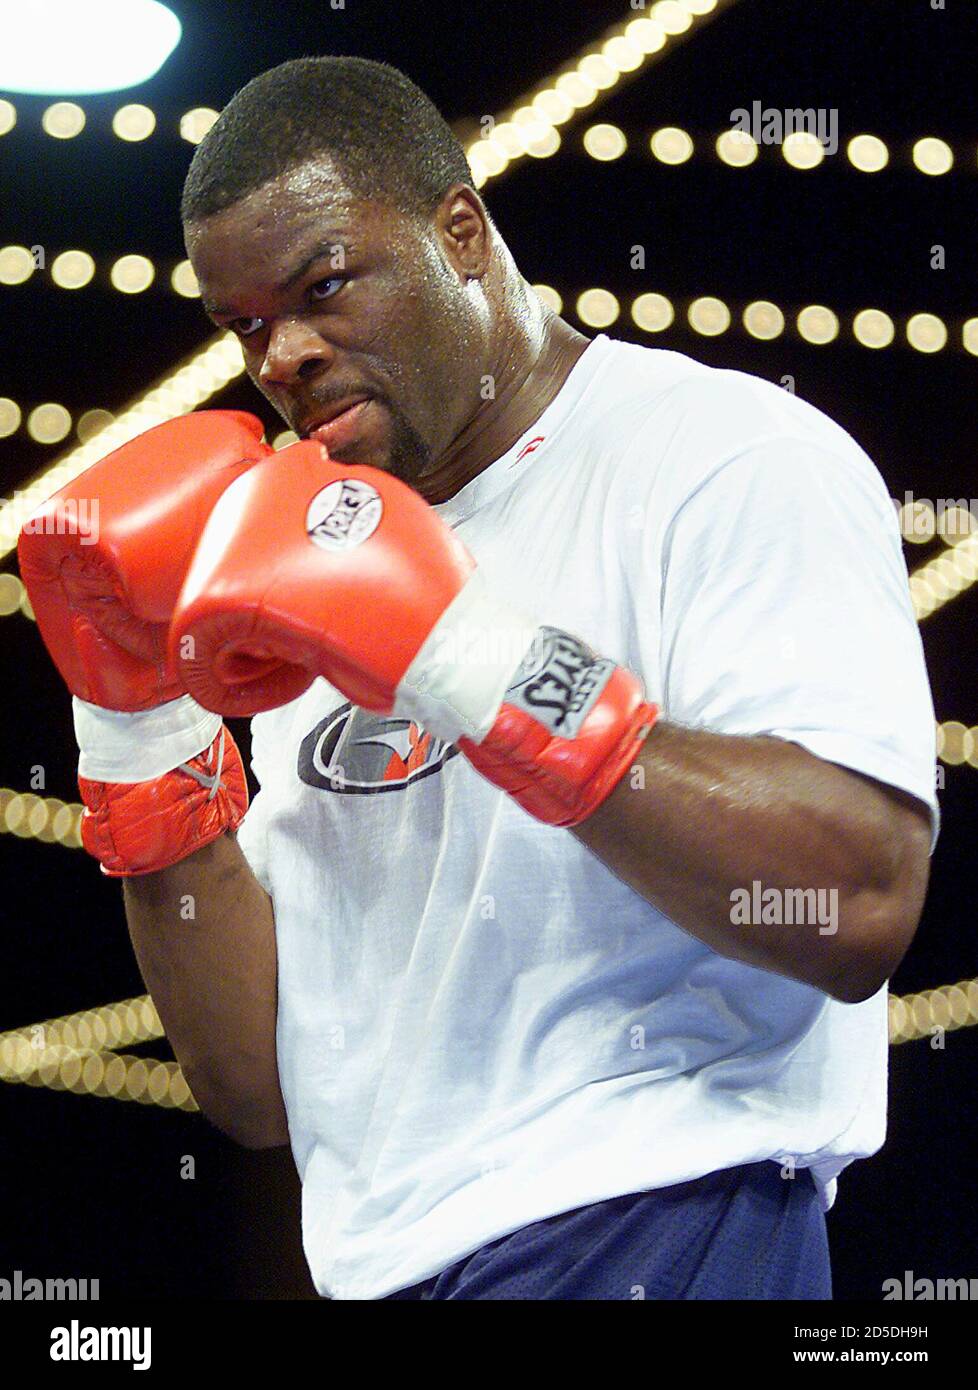 American heavyweight boxer Michael Grant shadow boxes during a workout at  New York's Madison Square Garden April 25. [Grant was preparing for his  upcoming fight against world heavyweight champion Lennox Lewis from